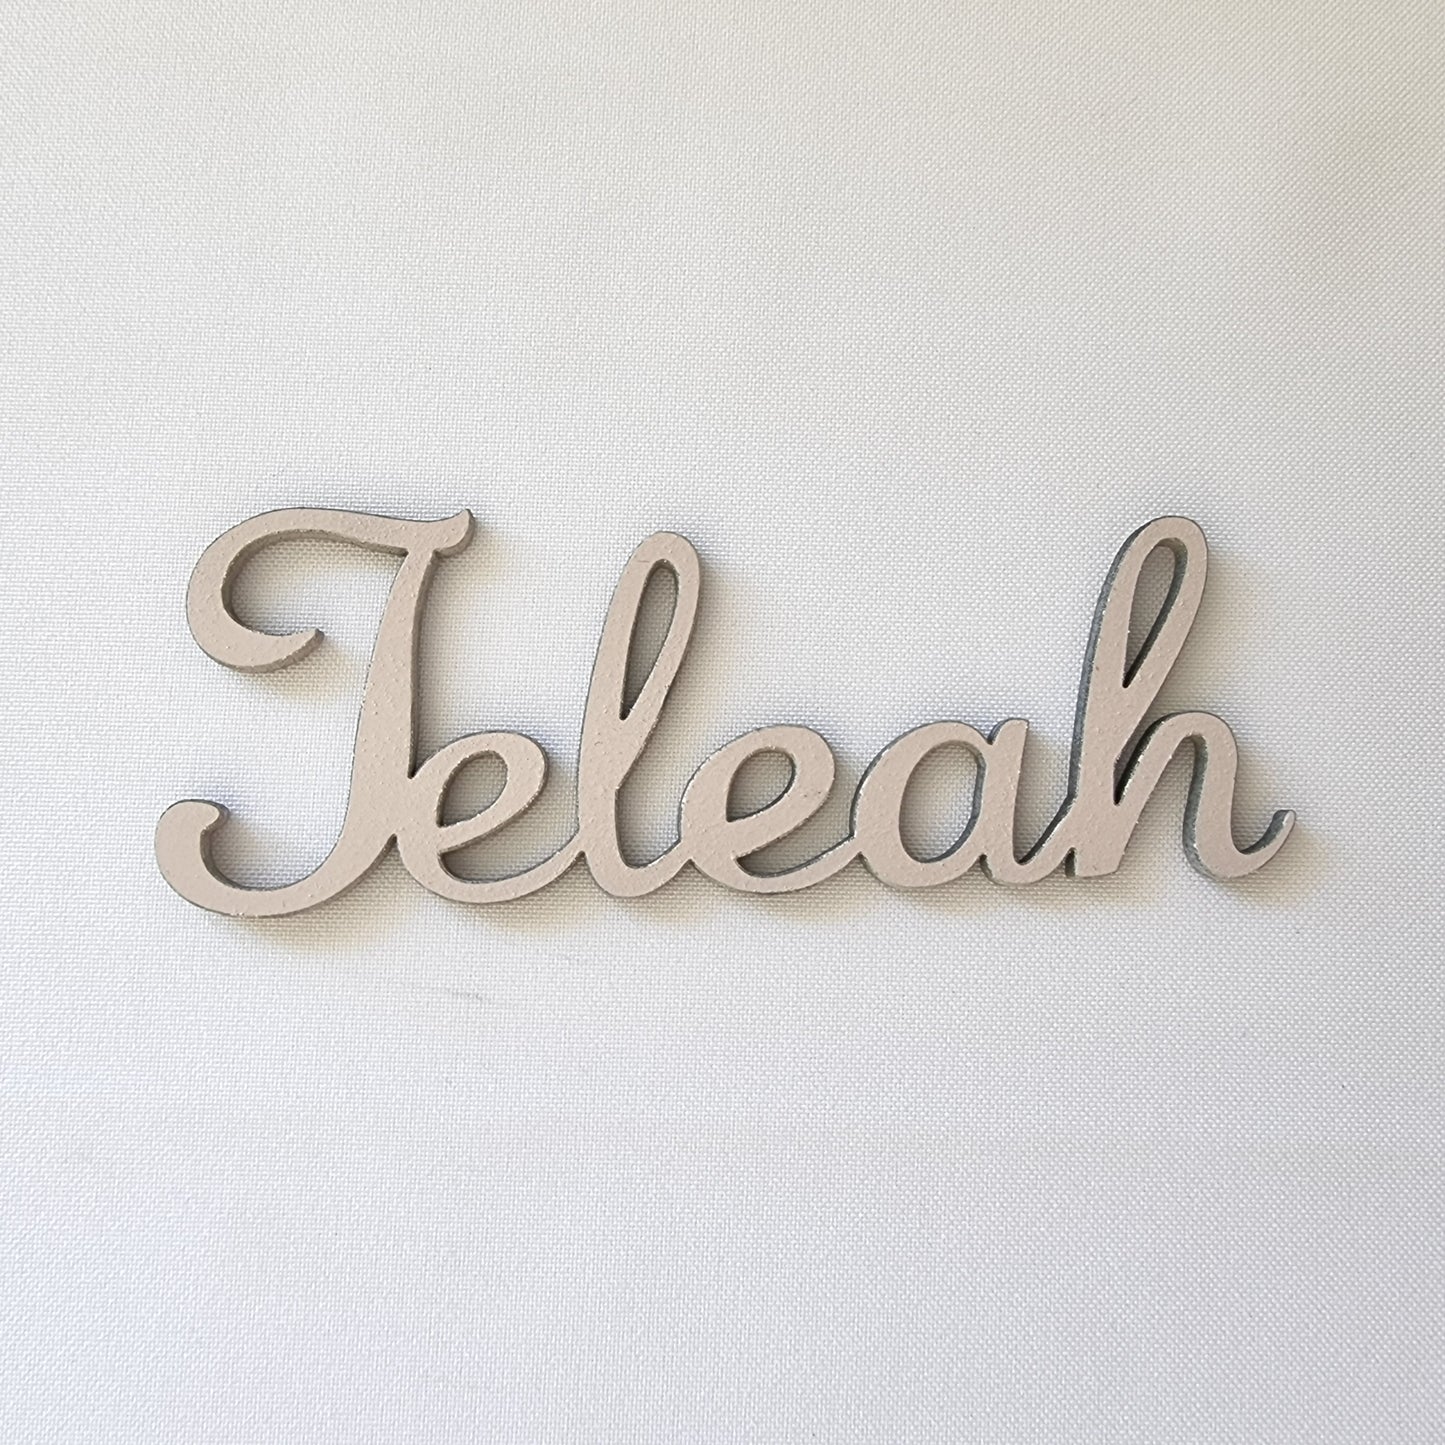 Wooden Place Name Cutouts - Name Cuts | Design Hut